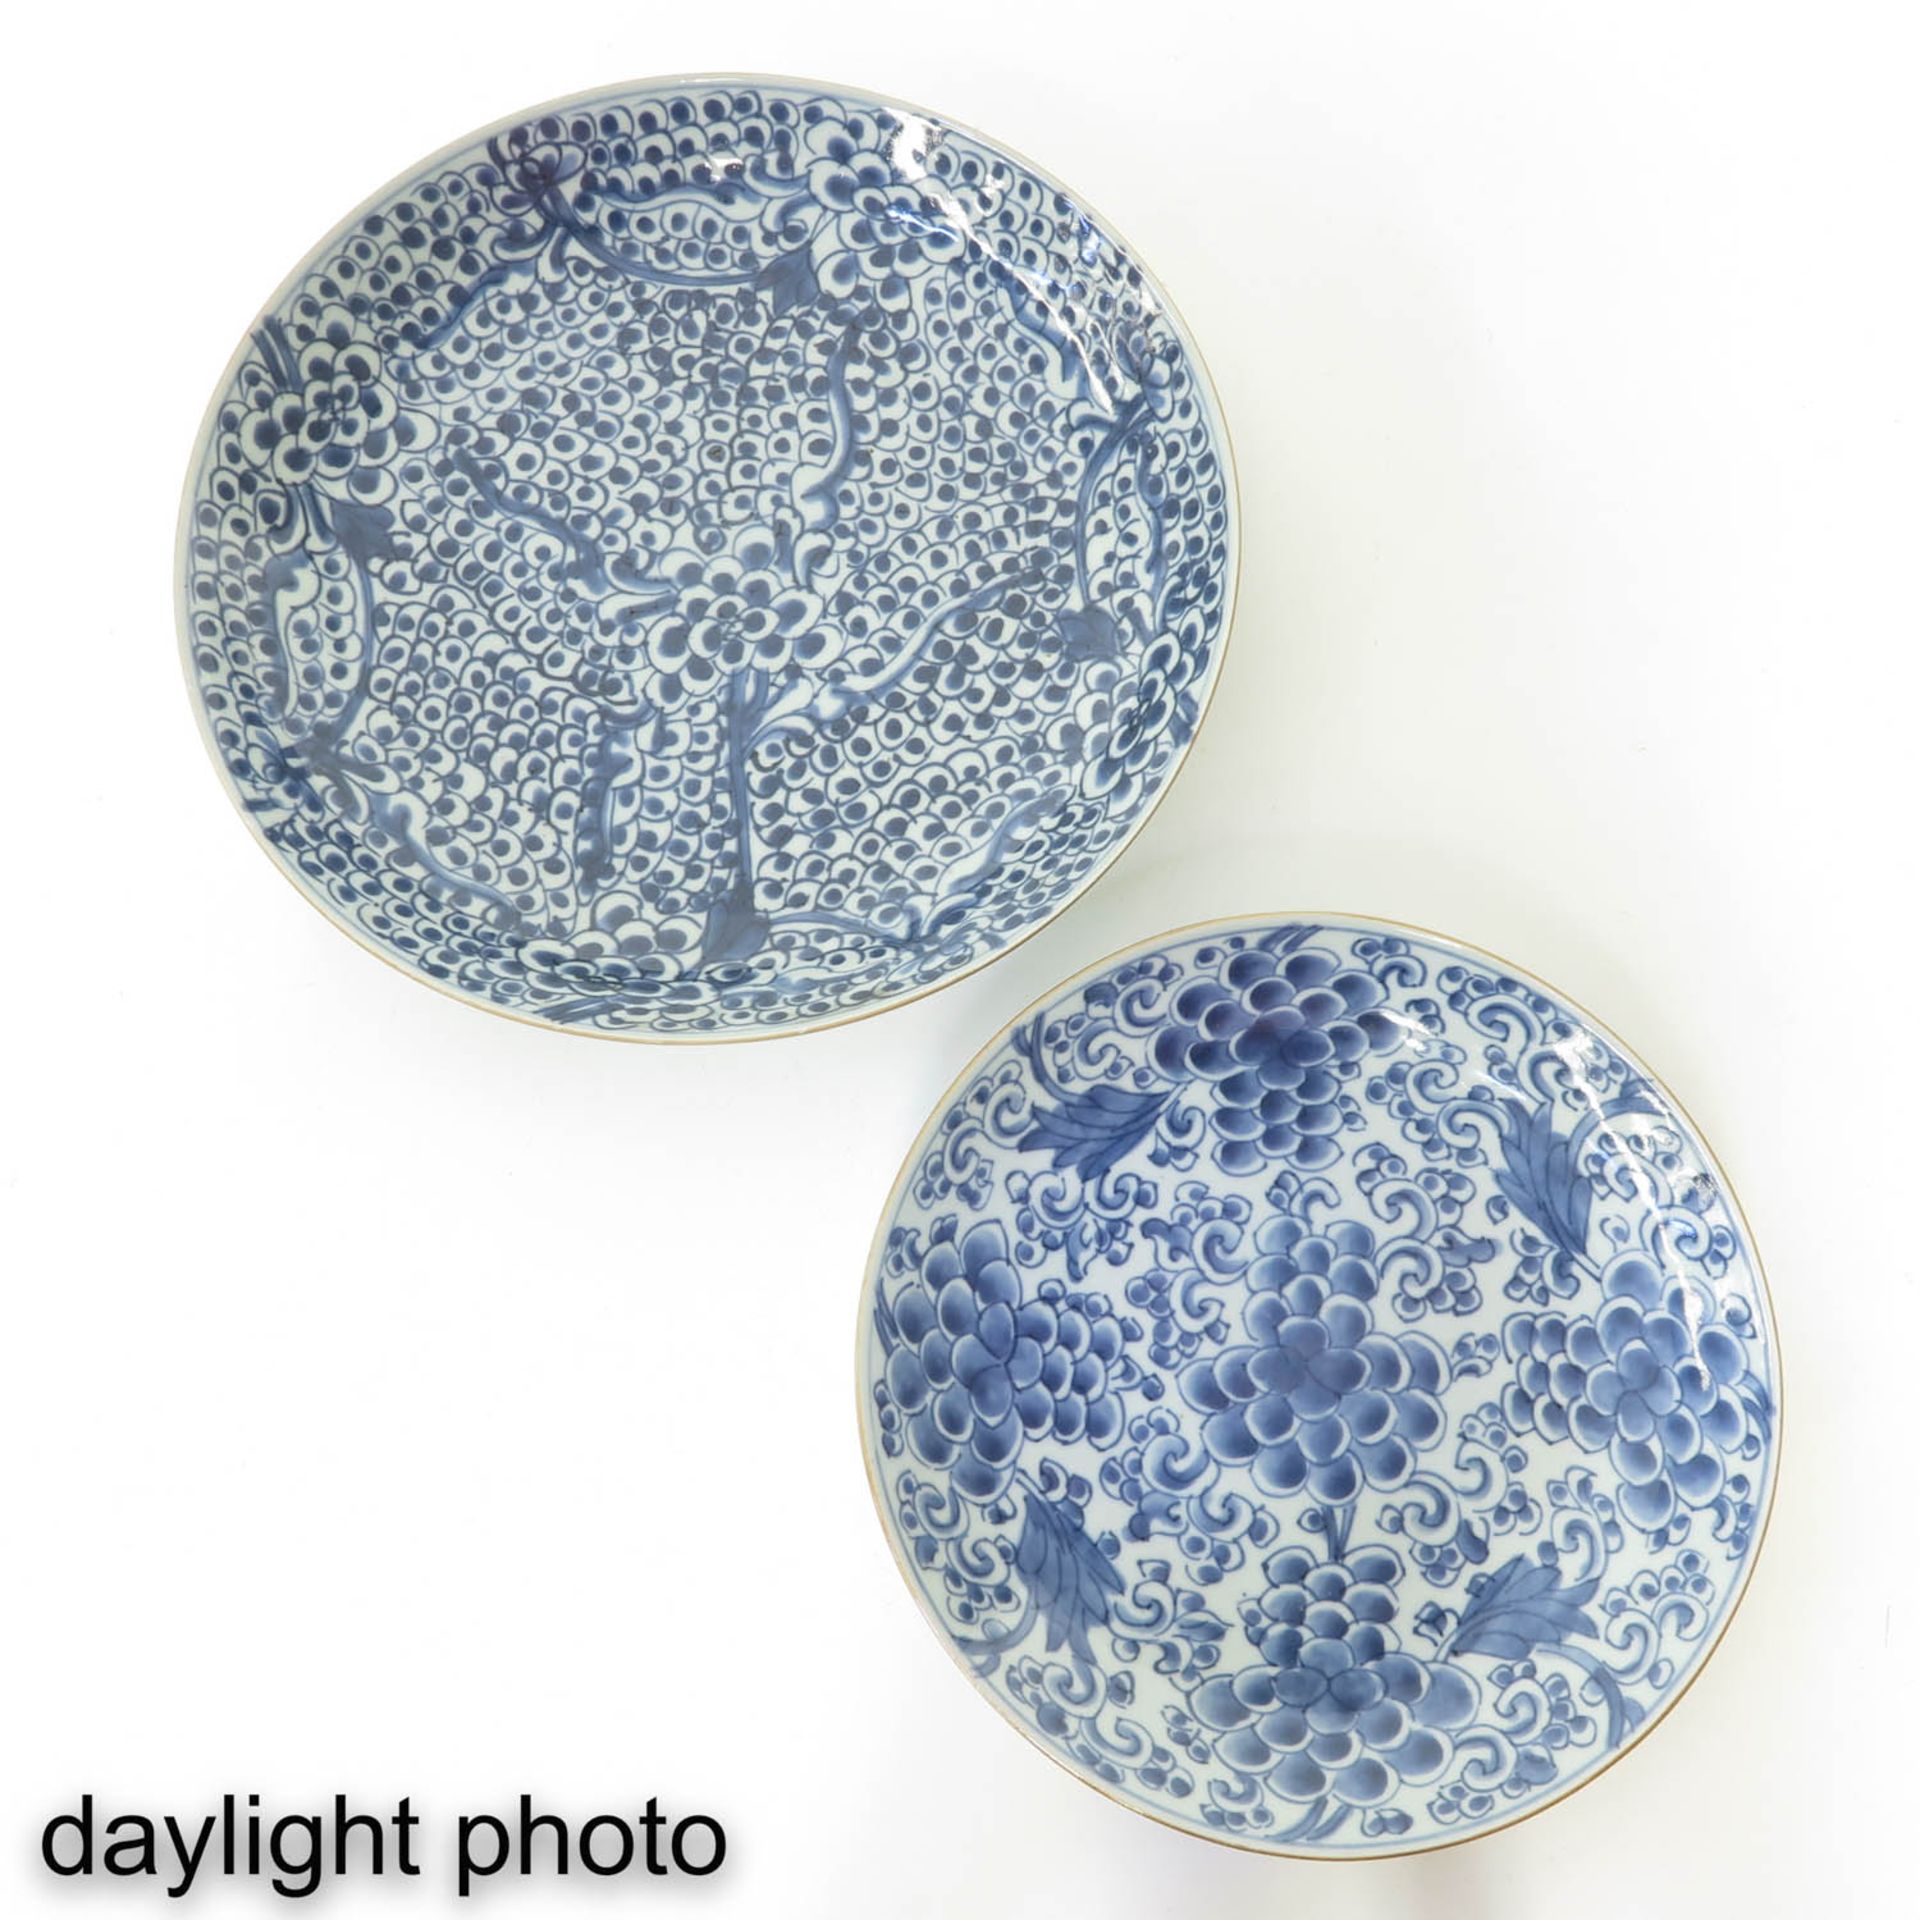 A Lot of 2 Blue and White Plates - Image 7 of 10